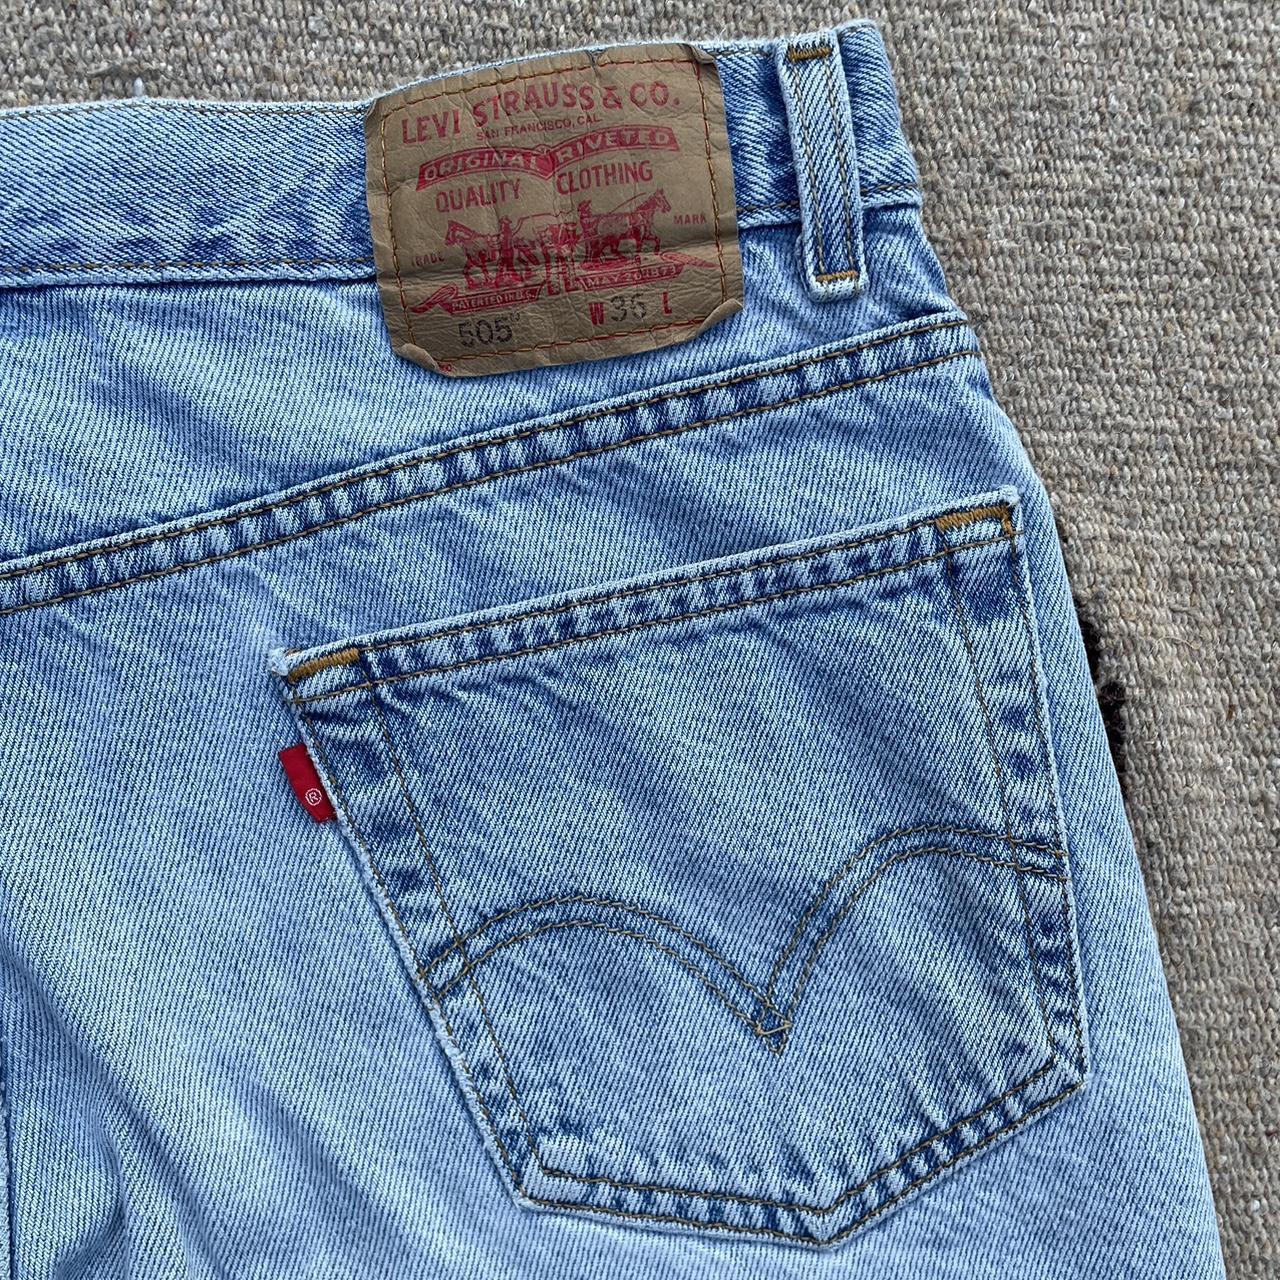 Levi's Men's Blue and Red Shorts (5)